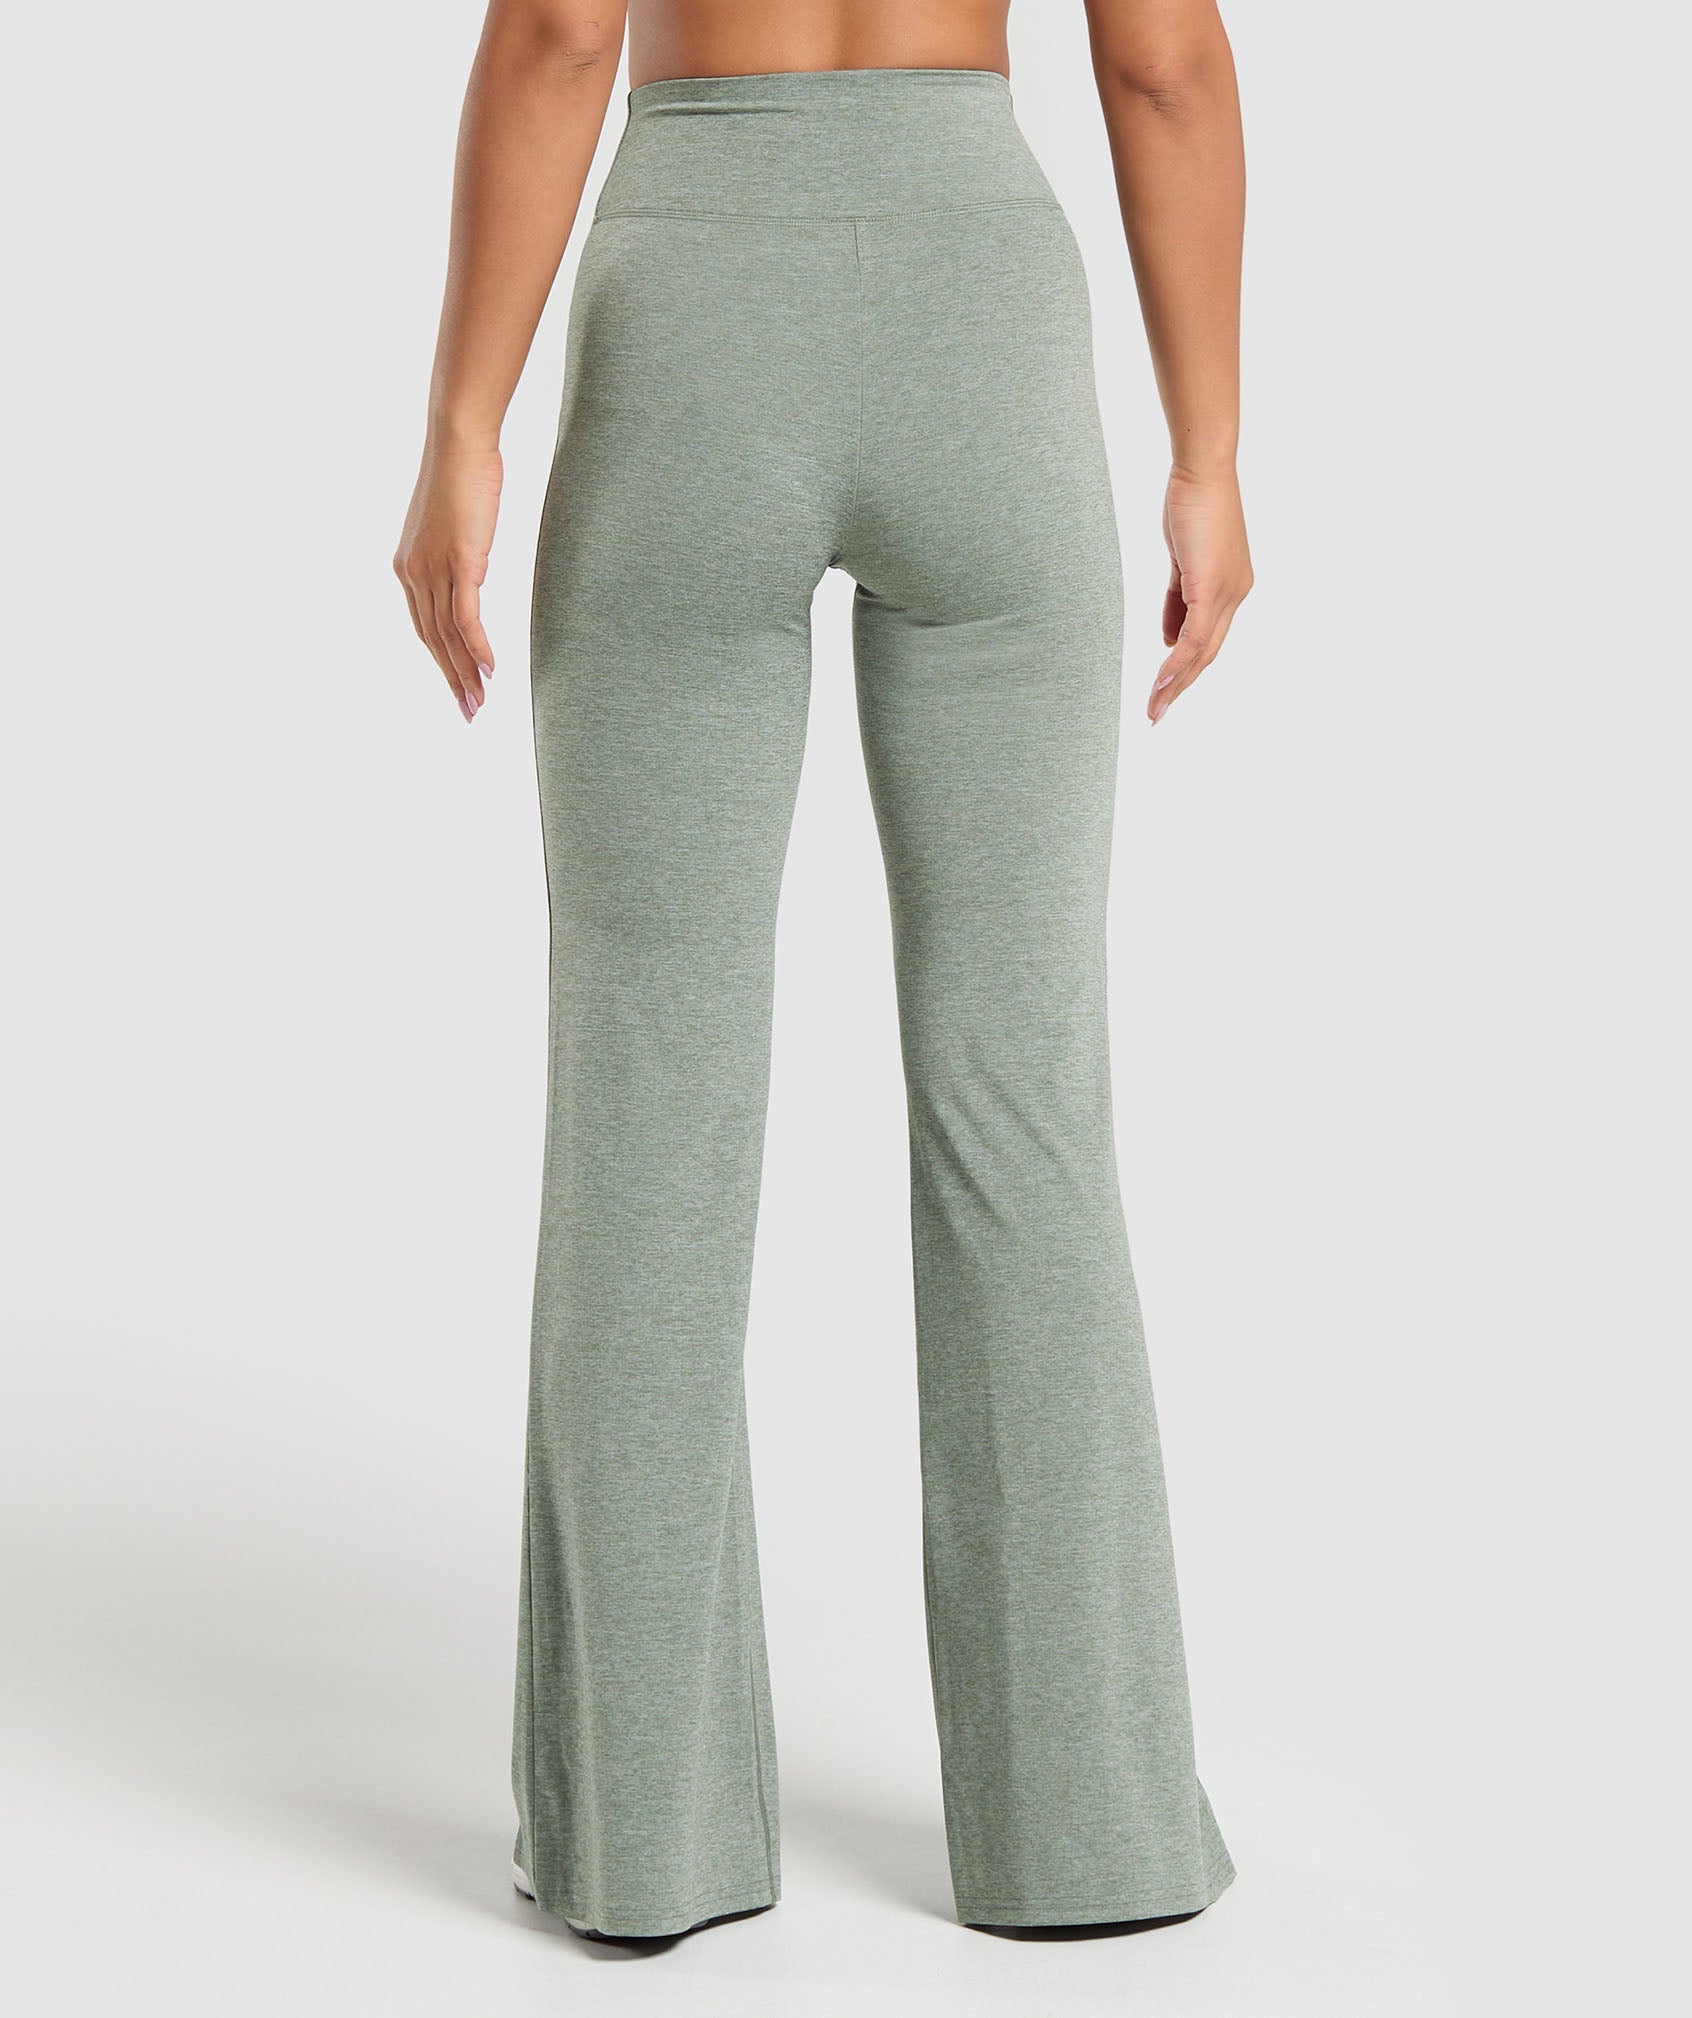 Marl Flared Leggings in Unit Green - view 2